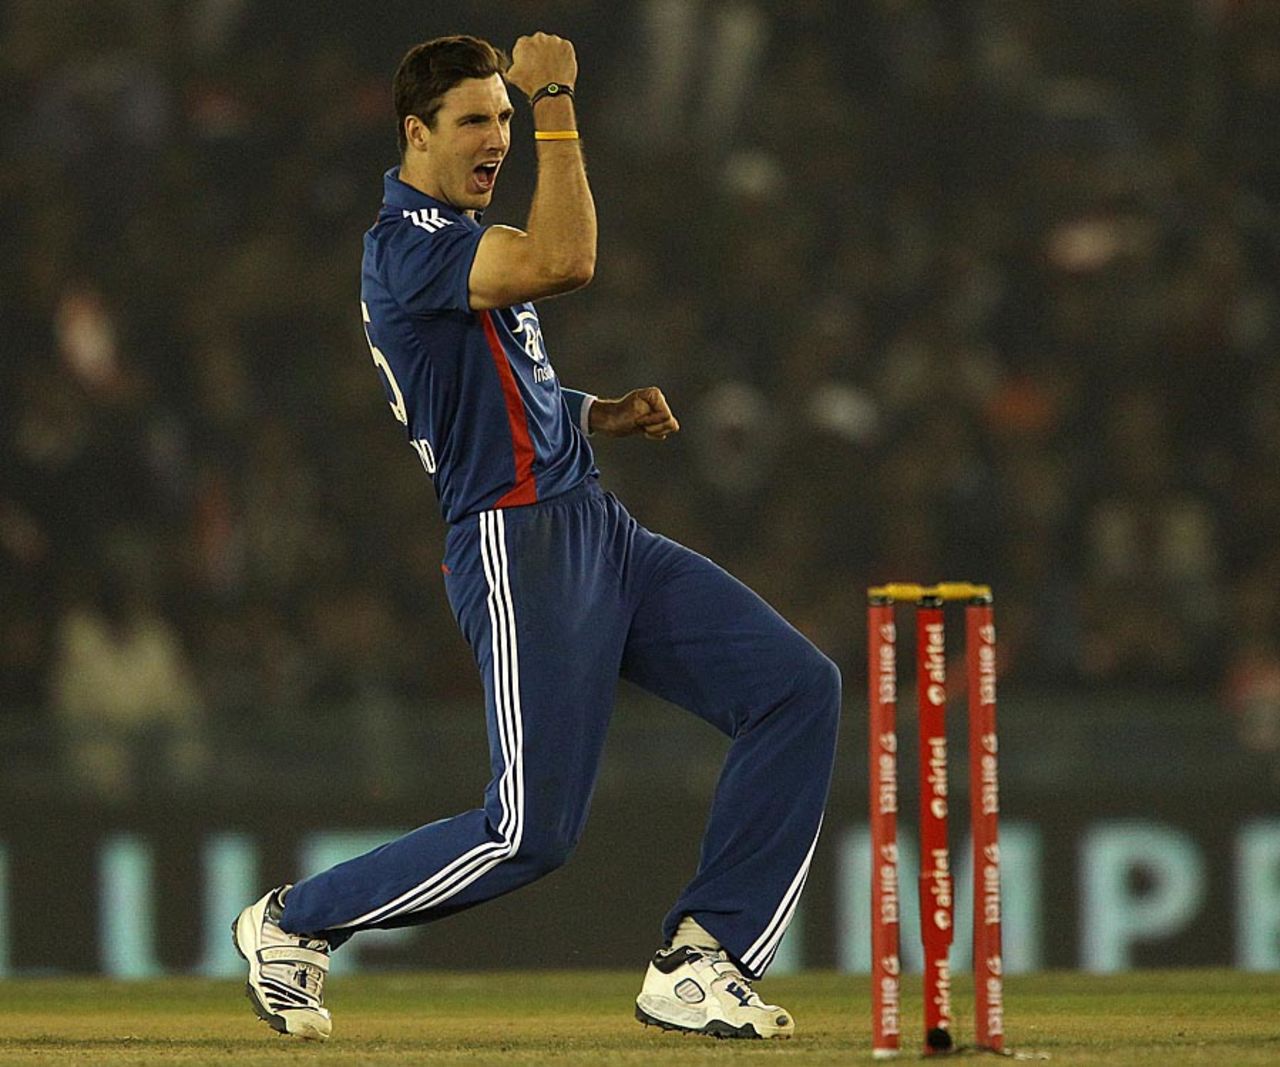 Steven Finn celebrates after getting Rohit Sharma out, India v England, 4th ODI, Mohali, January 23, 2013